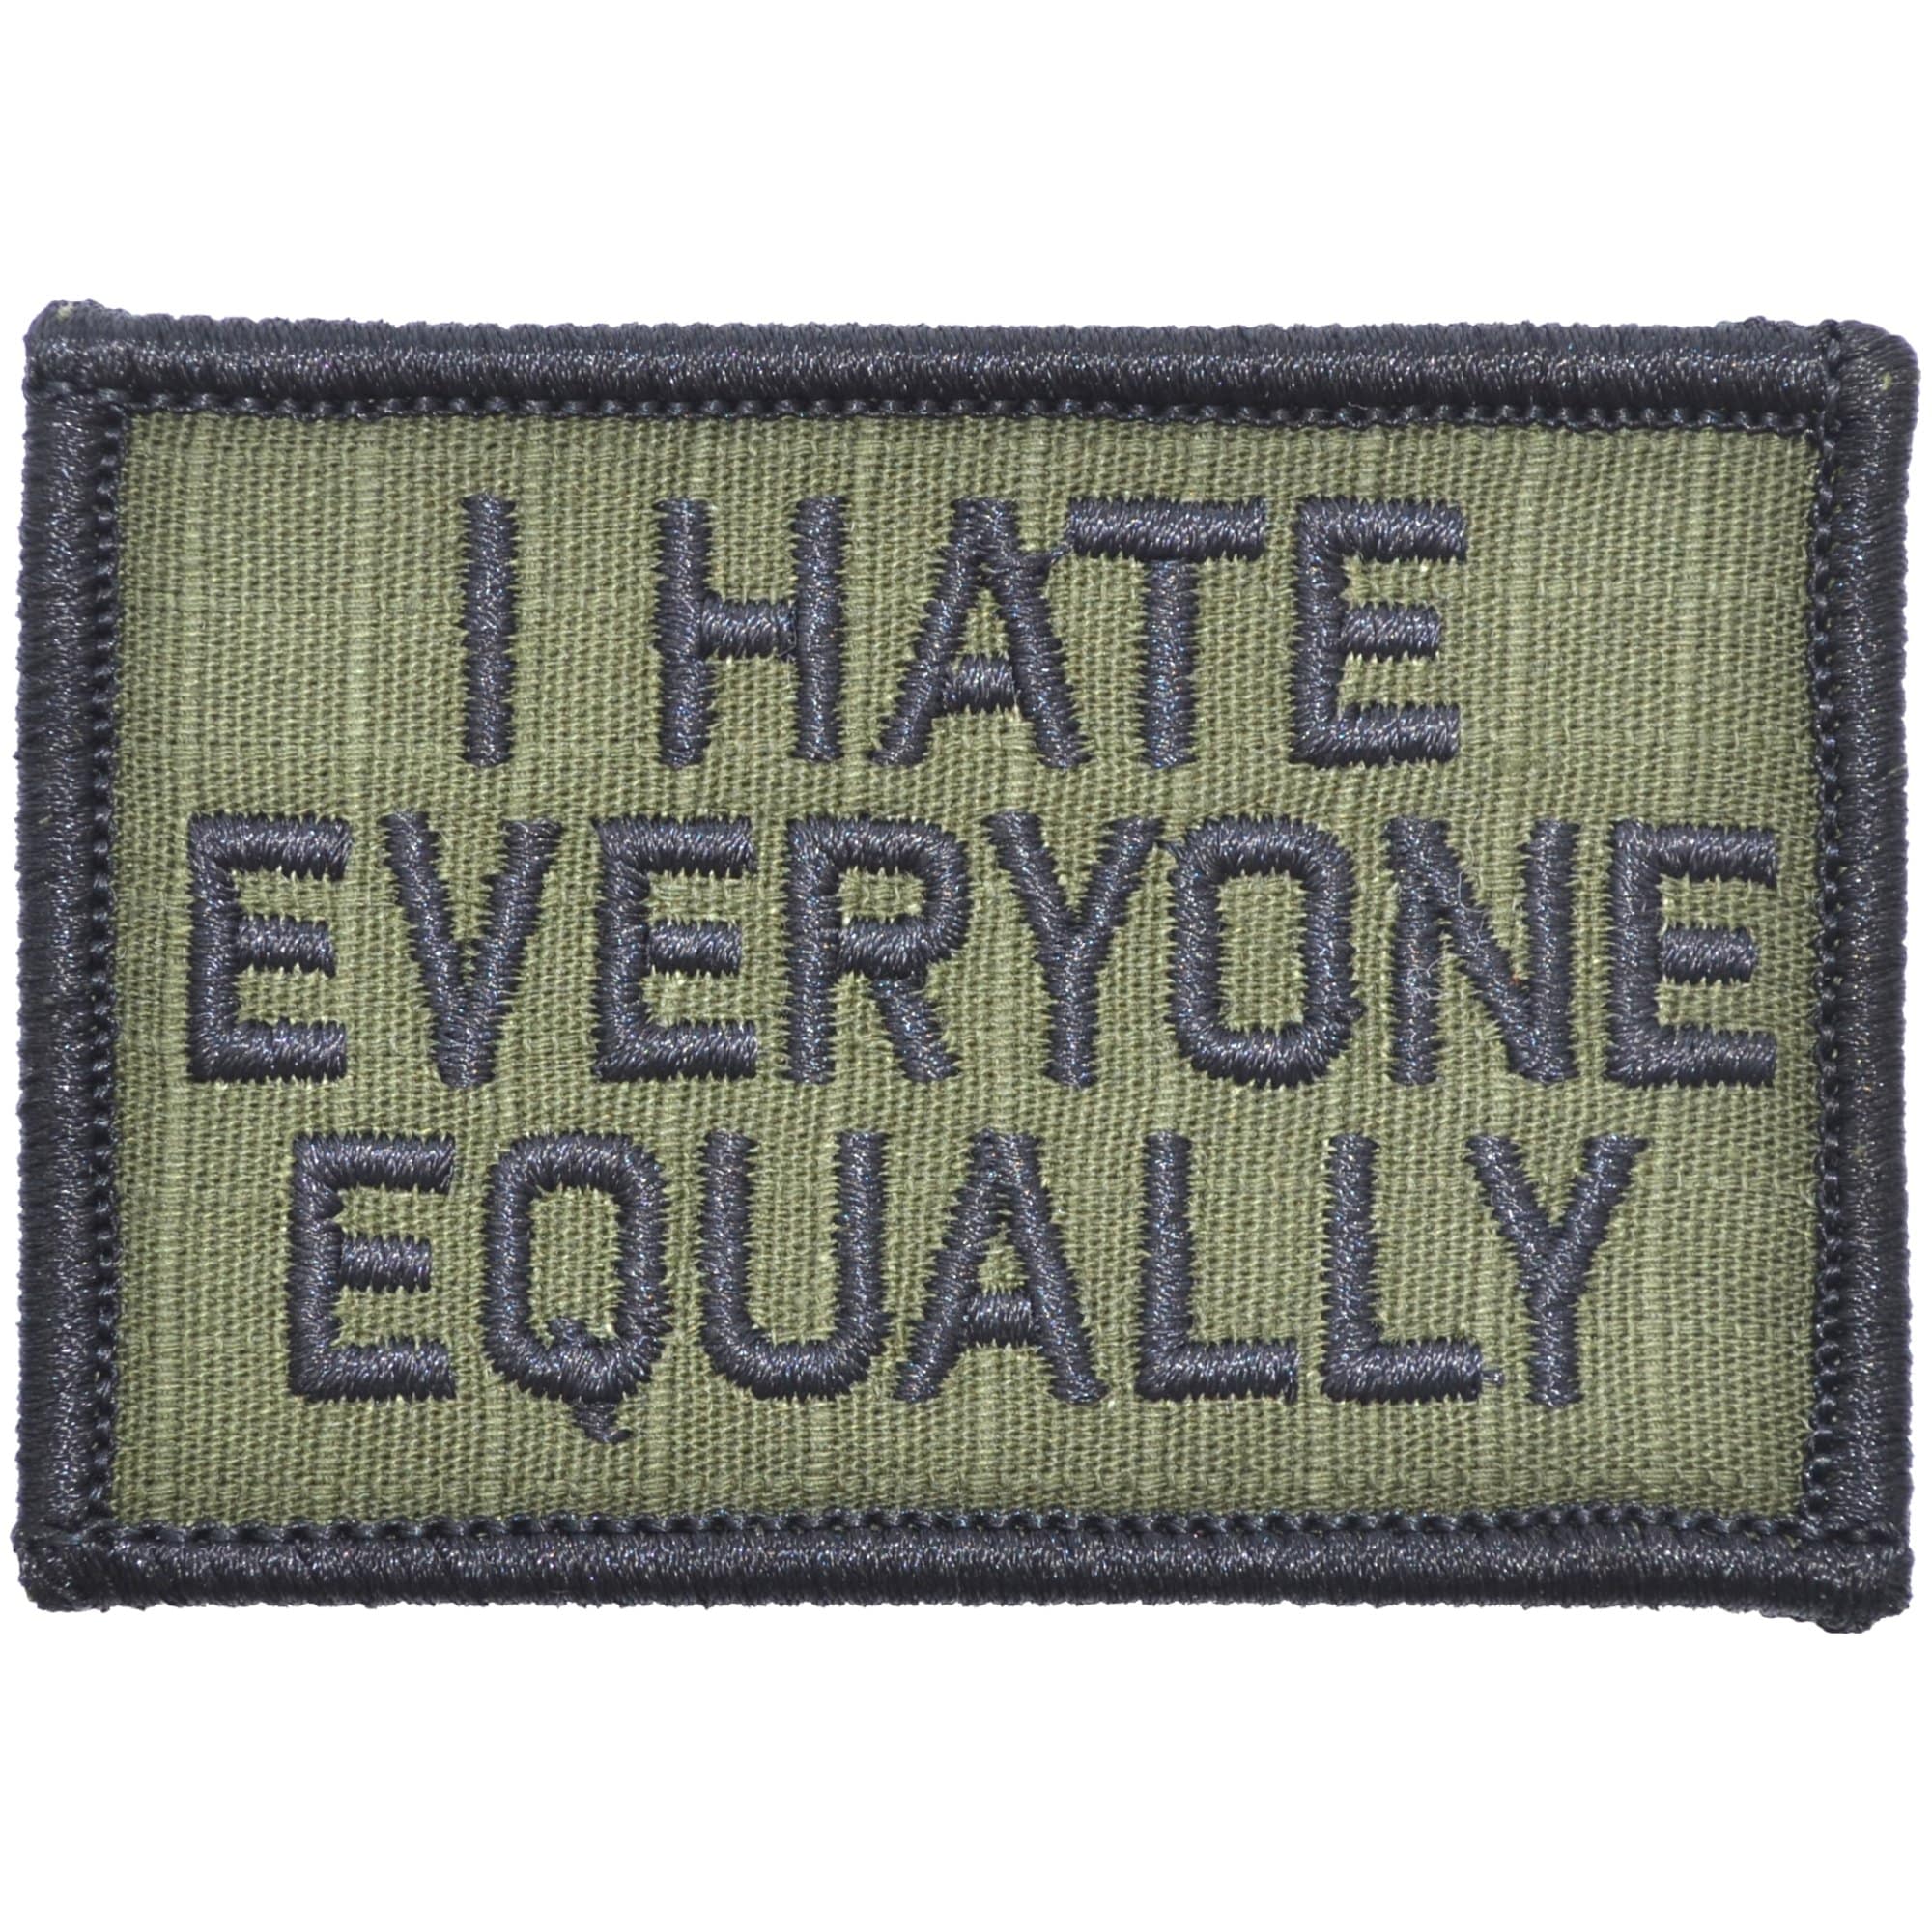 Tactical Gear Junkie Patches Olive Drab I Hate Everyone Equally - 2x3 Patch